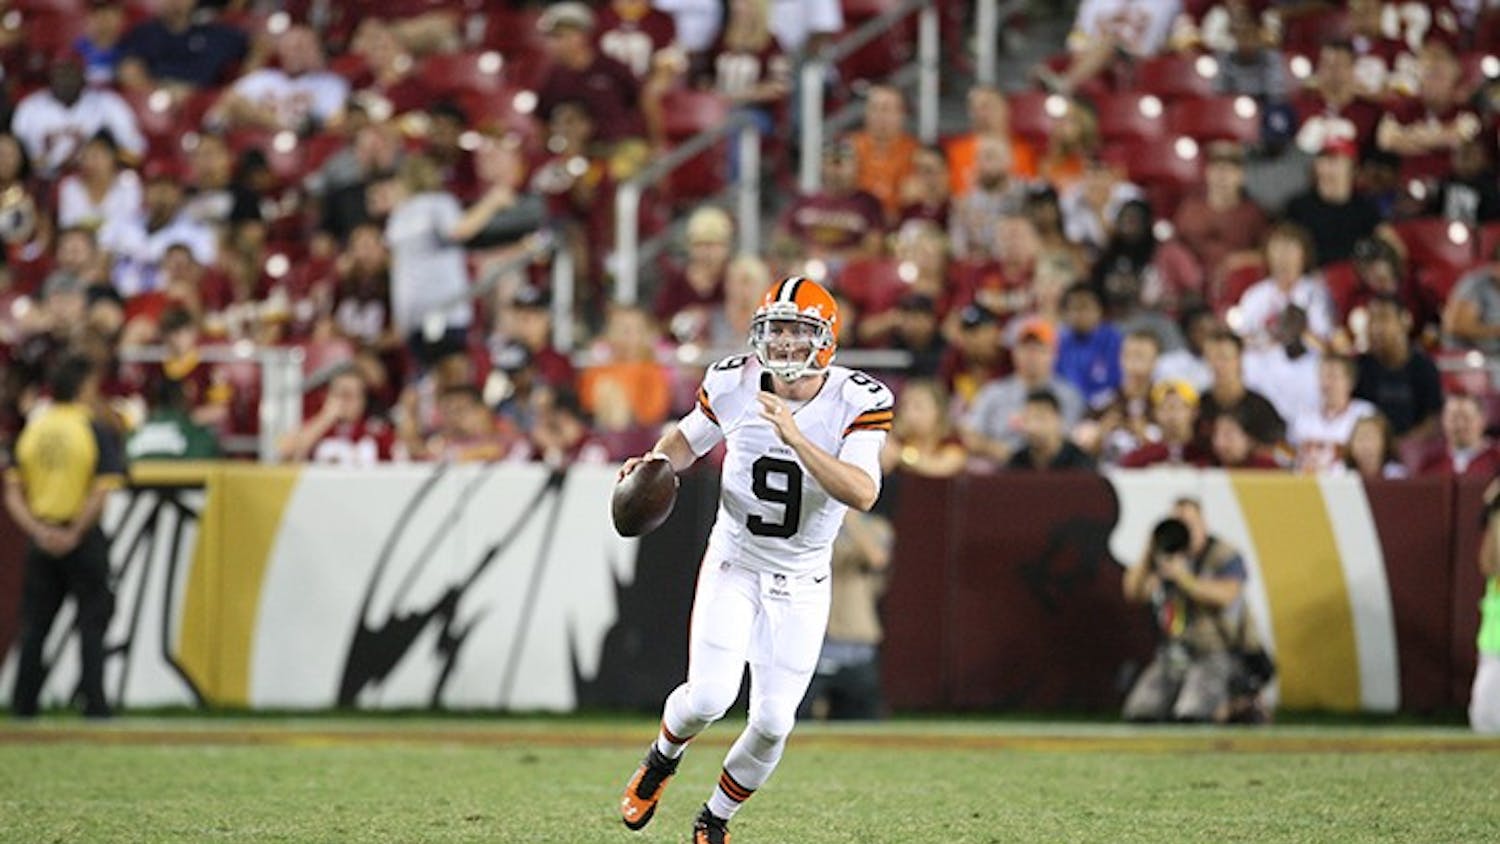 In Connor Shaw's first NFL action, he went 8-for-9 for 123 yards and a touchdown.